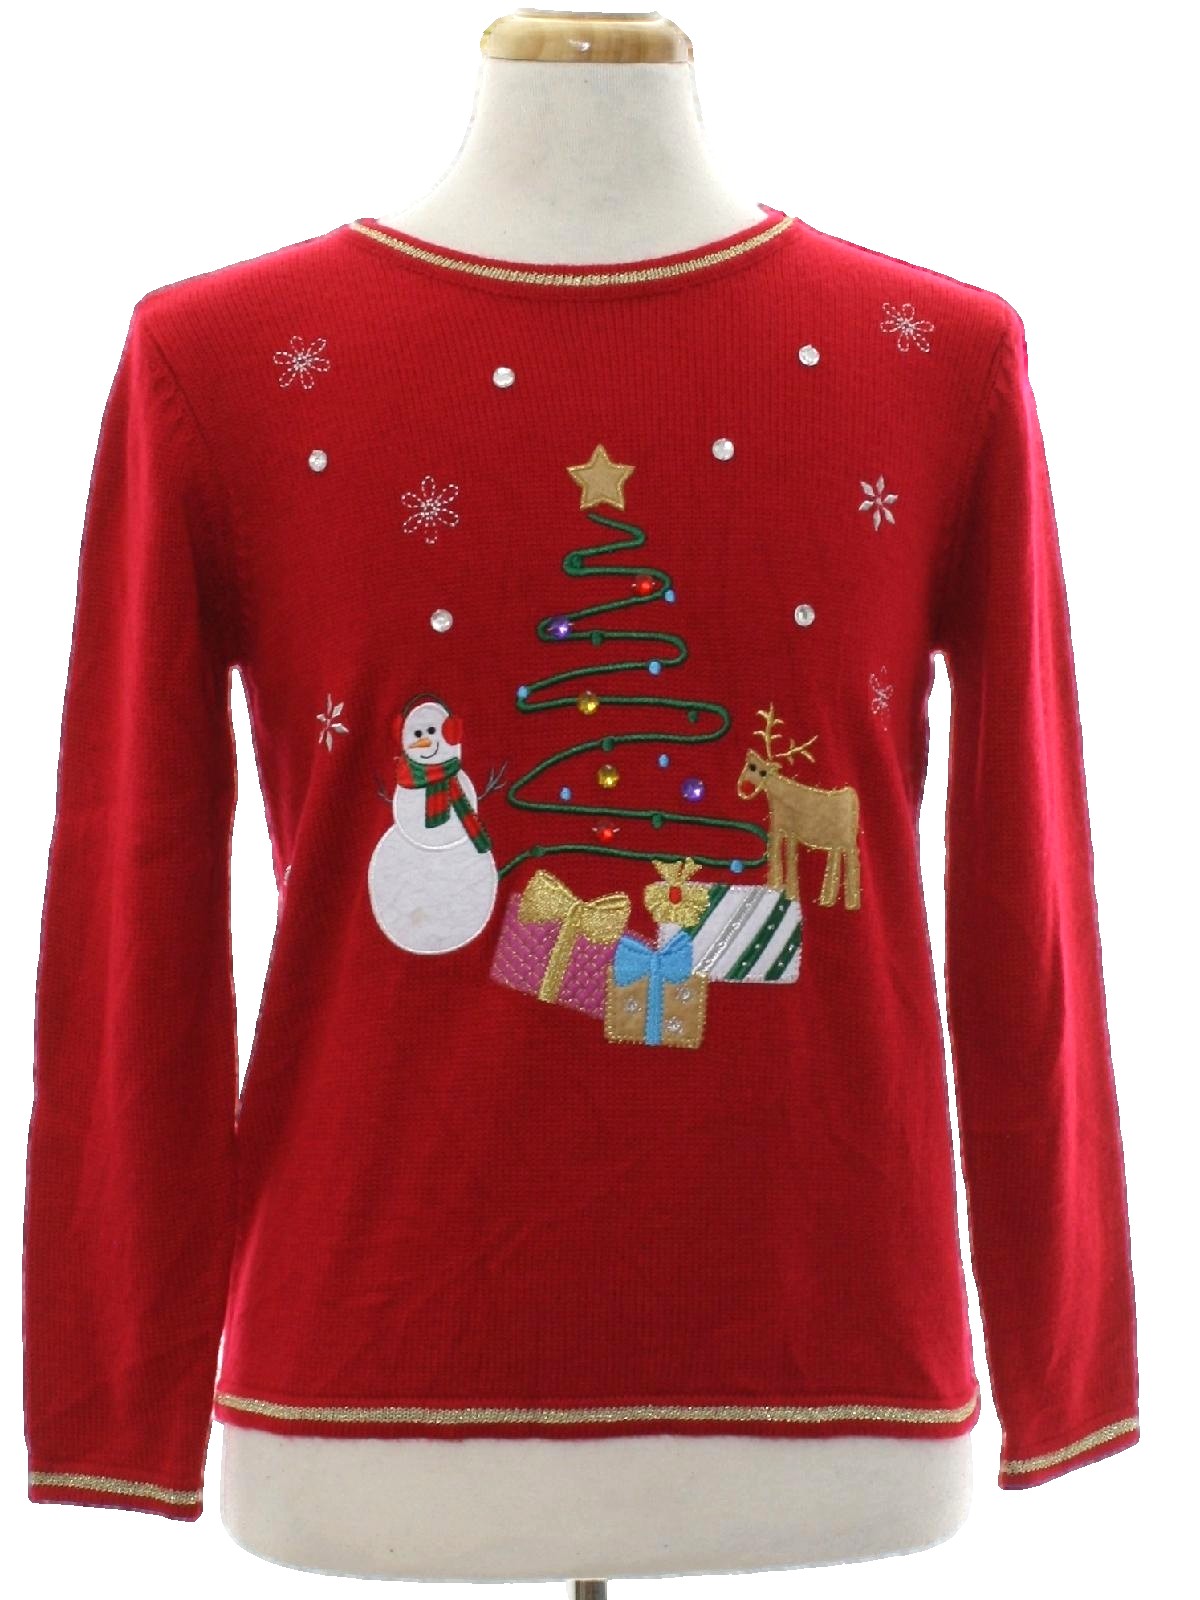 Womens Ugly Christmas Sweater: -Care Label Only- Womens red background ...